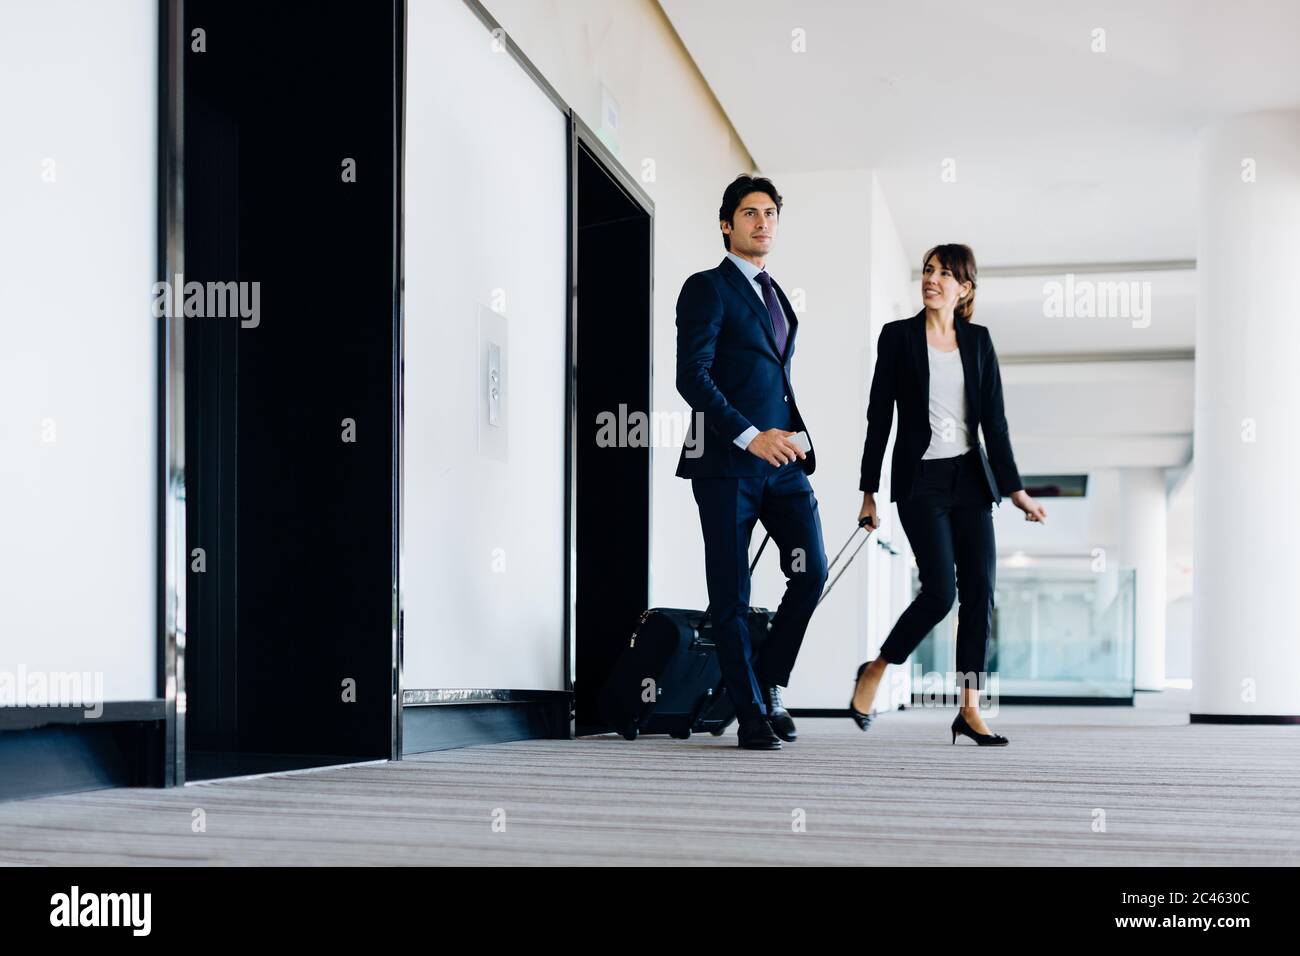 Businessman and businesswoman with wheeled luggage in hotel building Stock Photo